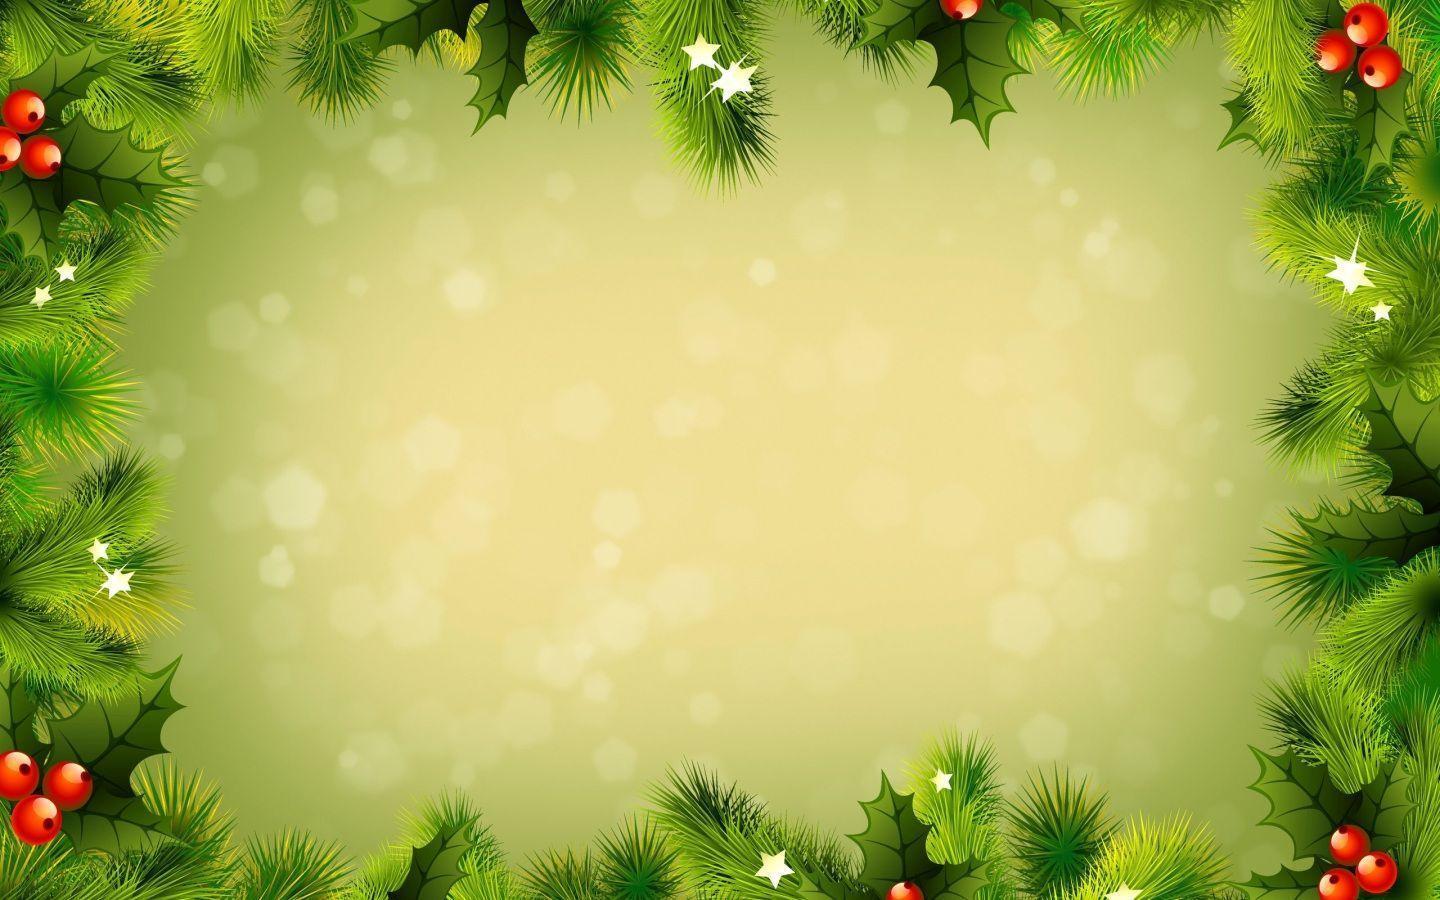 Xmas Stuff For > Green Christmas Background Wallpaper